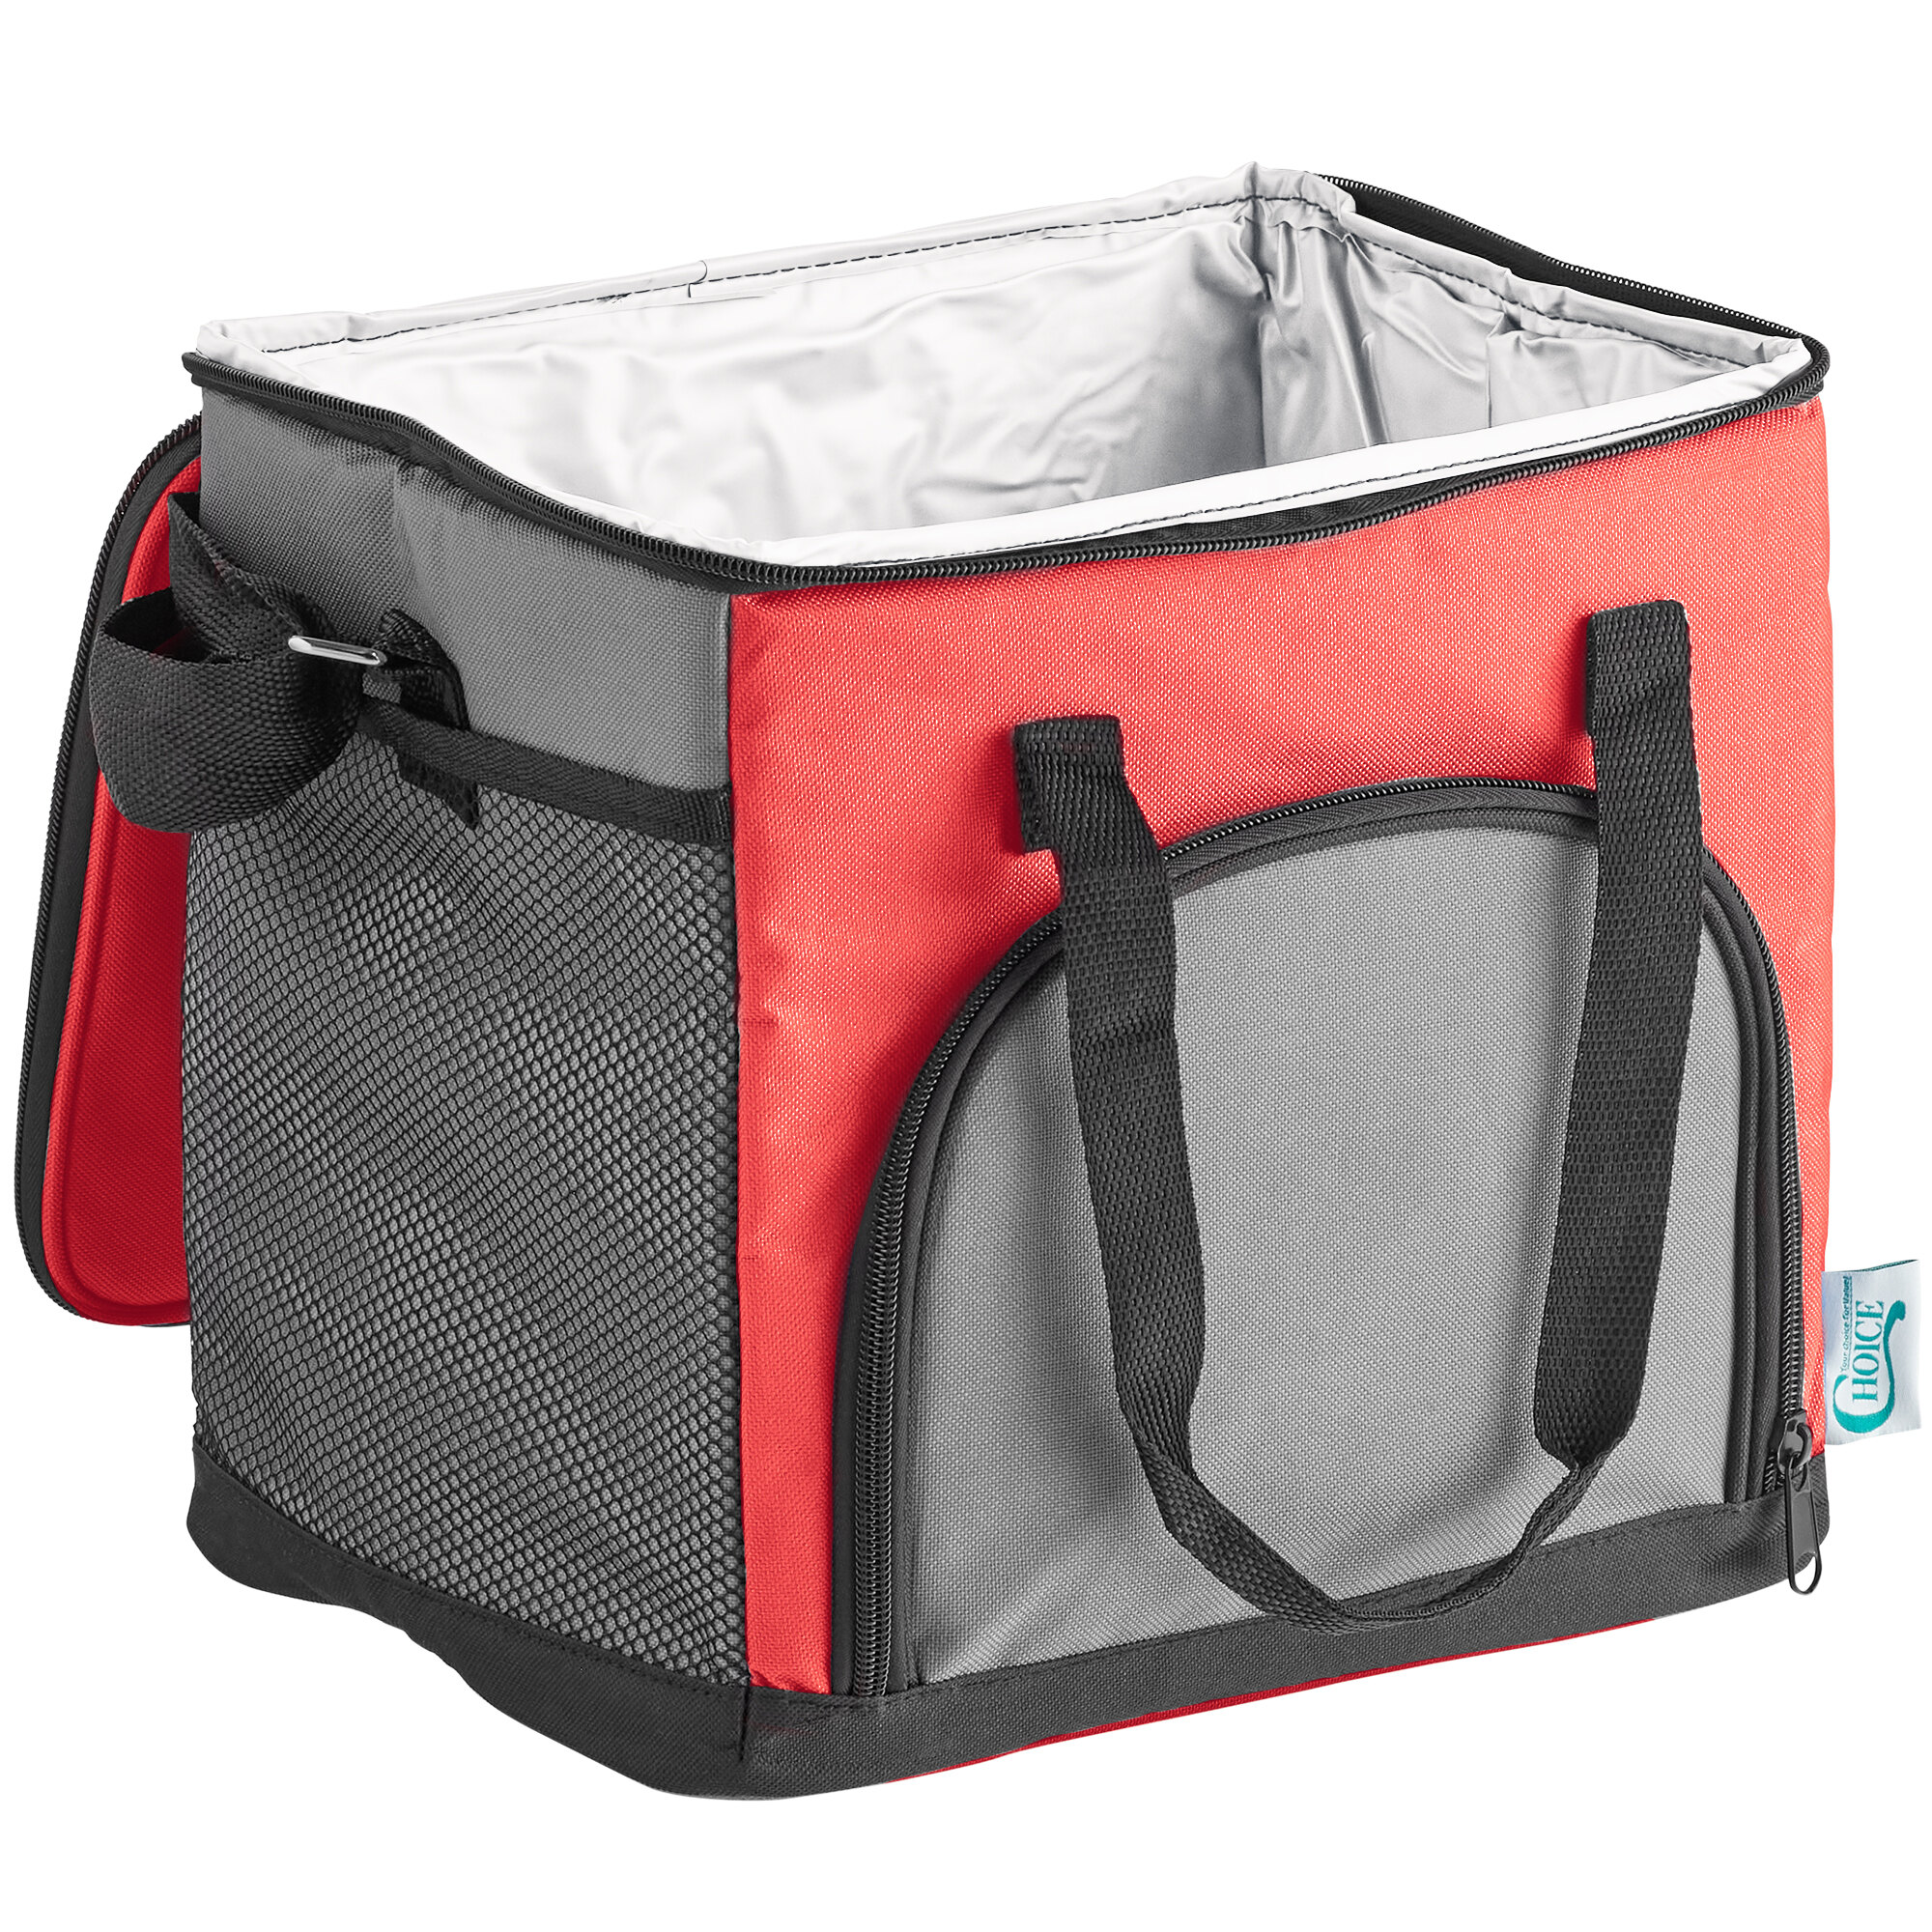 Insulated Cooler Bag, 12